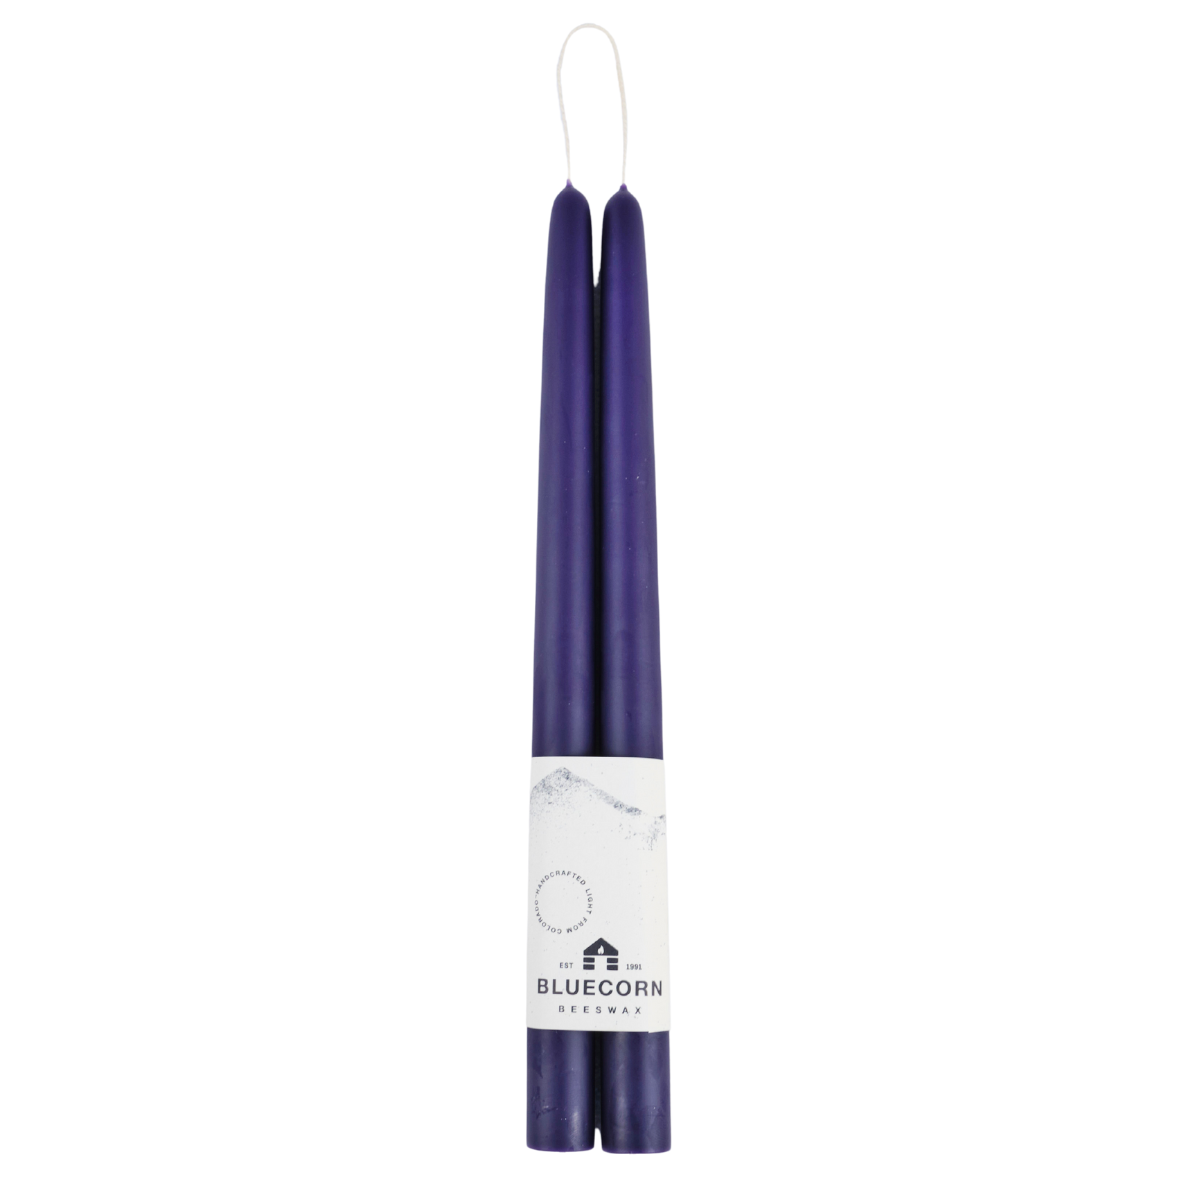 Pair of Hand-Dipped Beeswax Taper Candles - Eggplant